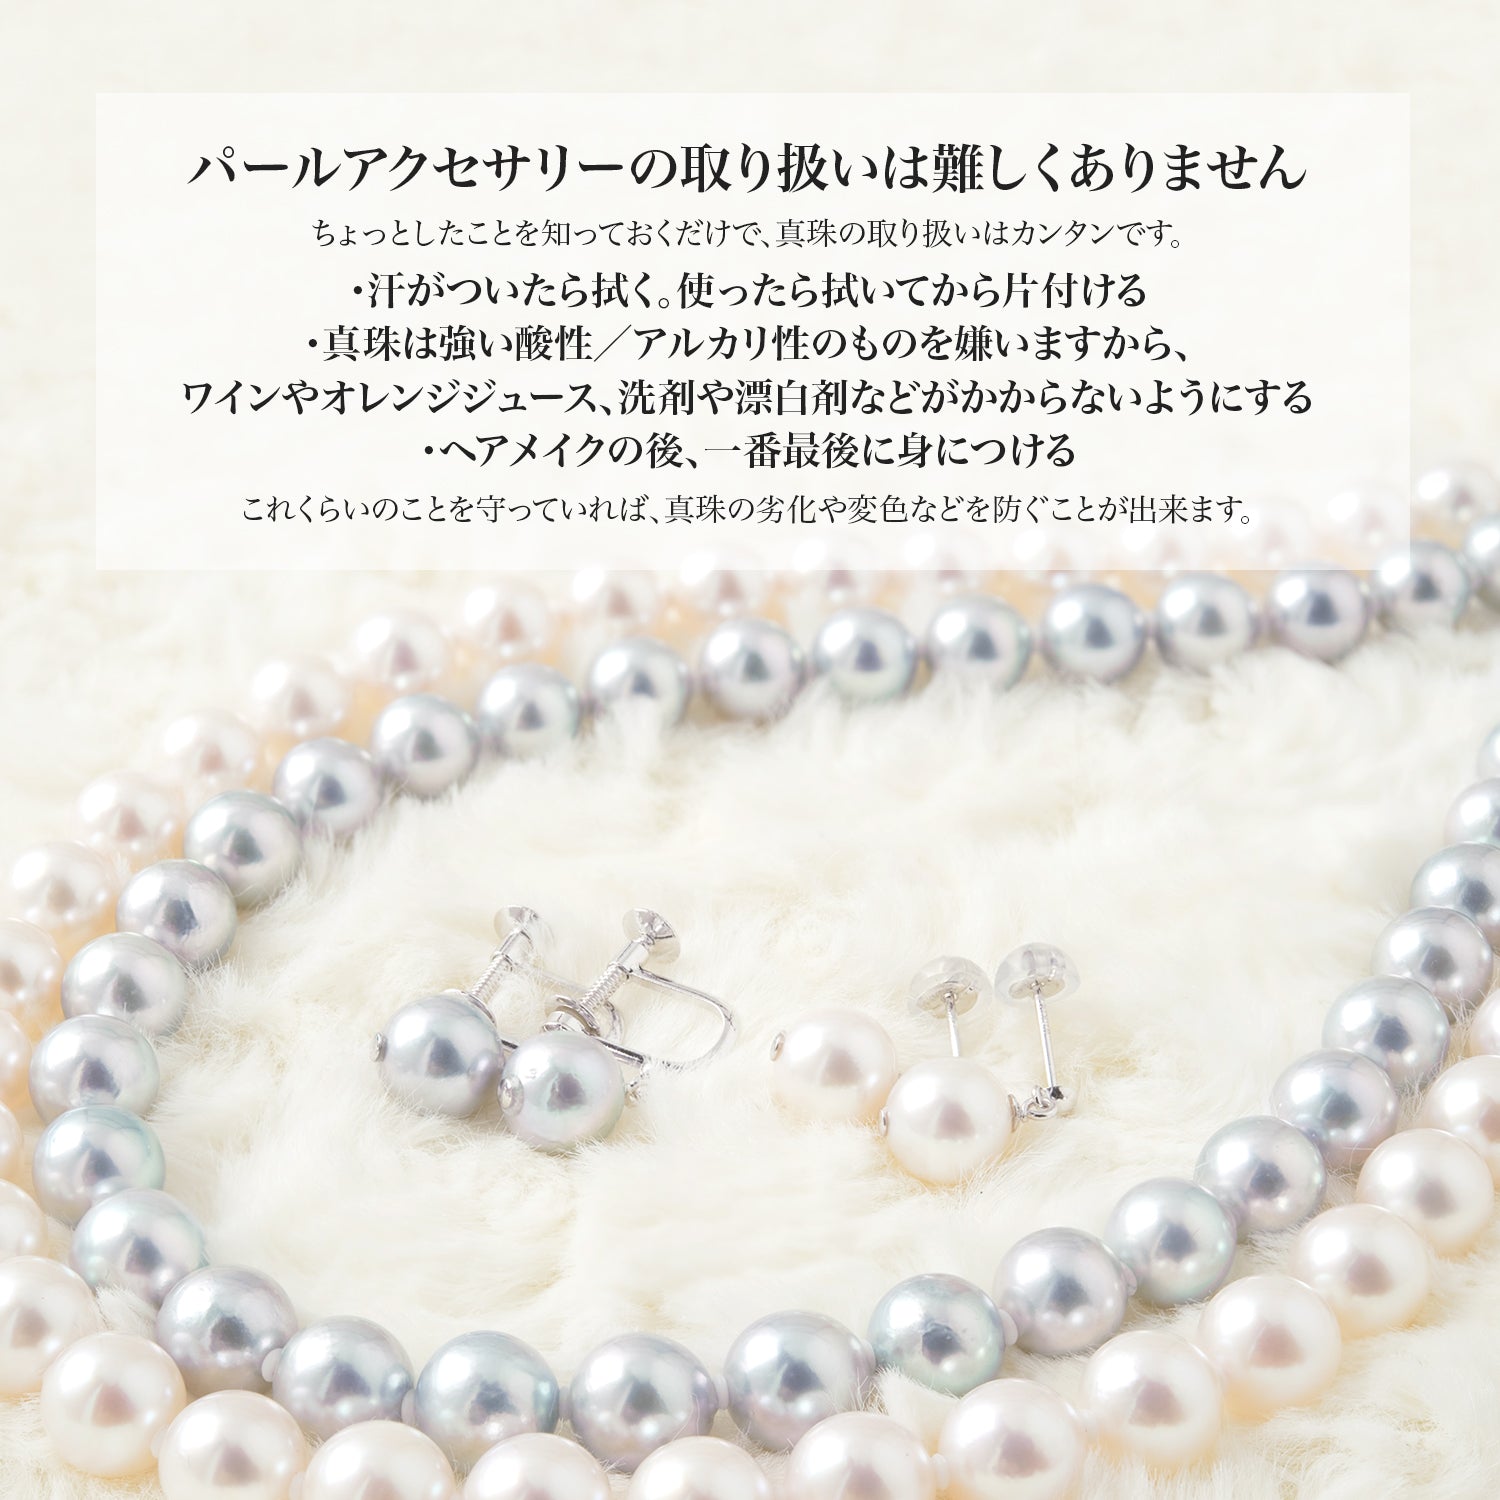 [Gold Akoya] Pearl through necklace [8.0-8.5mm] Brass rhodium / gold Akoya pearl [2 colors]